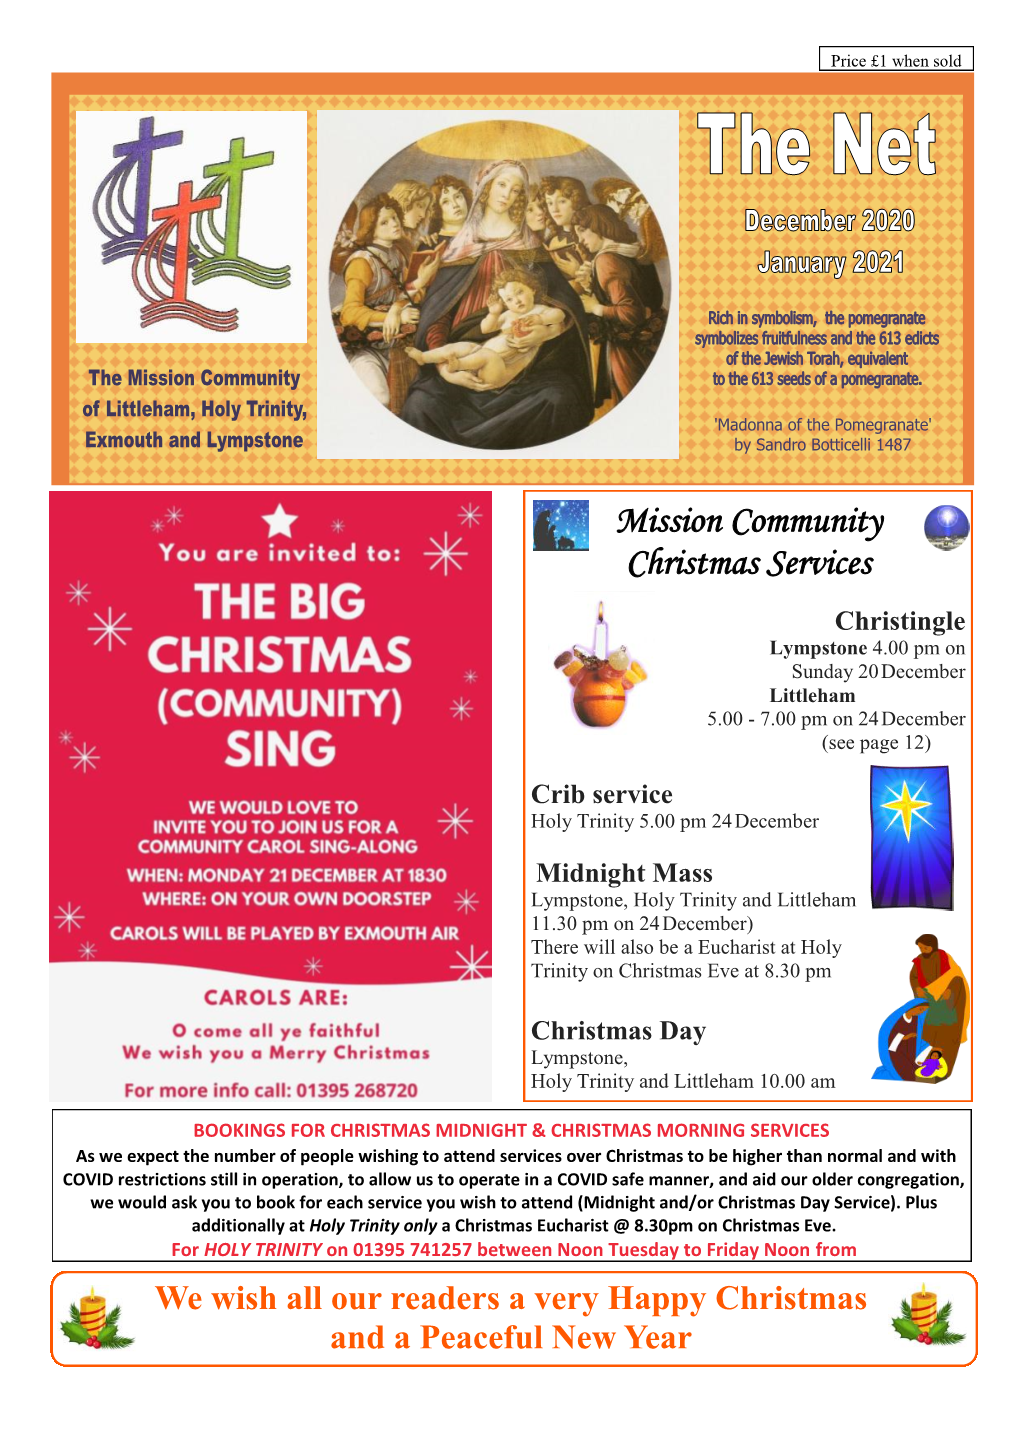 Mission Community Christmas Services